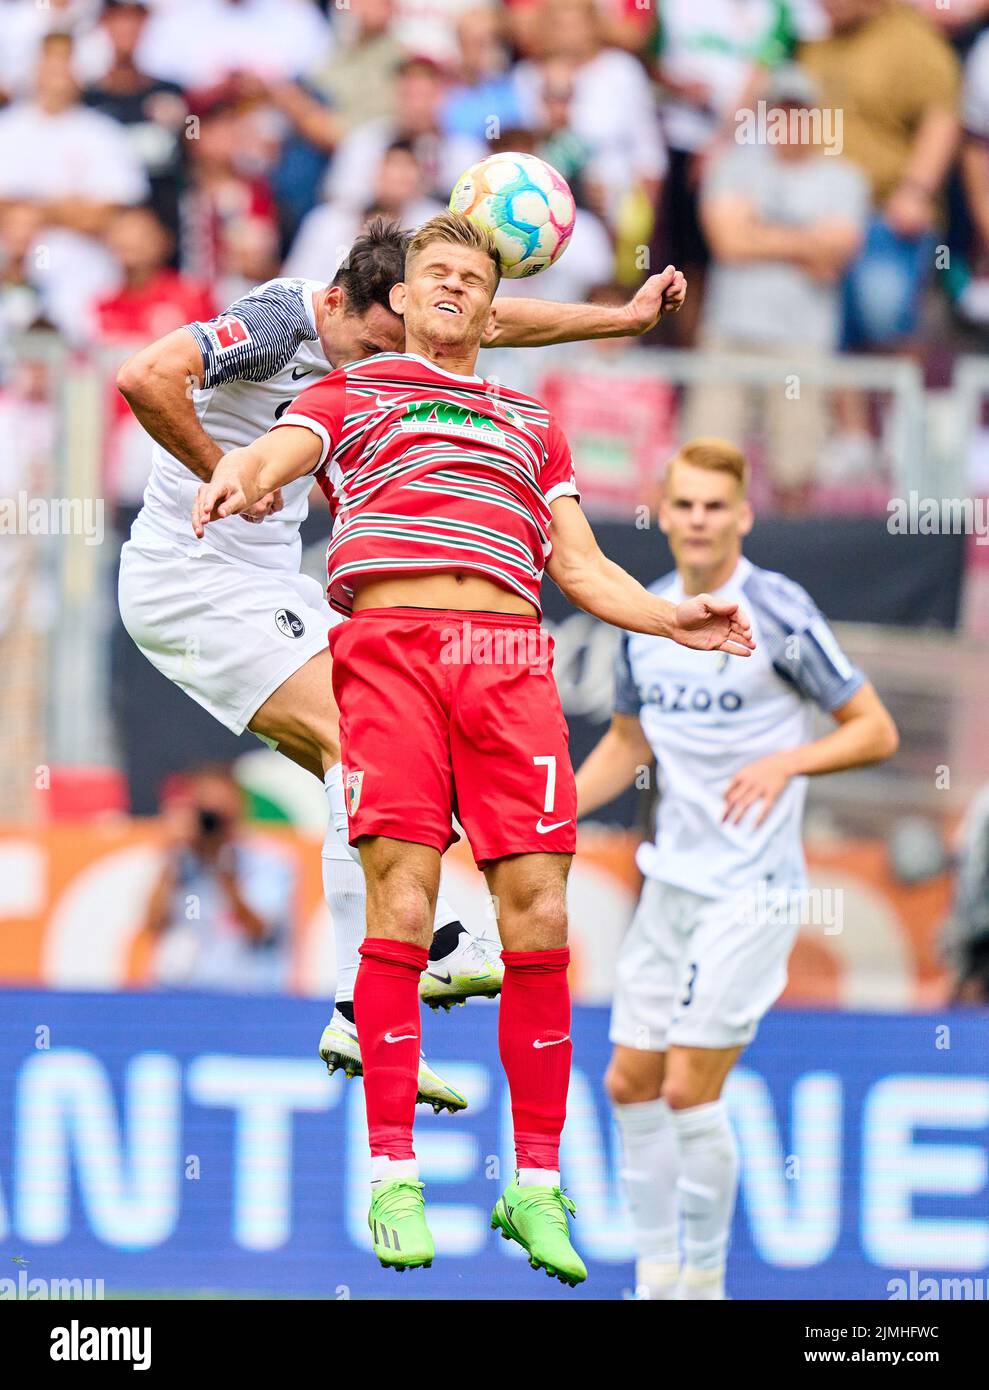 Florian NIEDERLECHNER, FCA 7  compete for the ball, tackling, duel, header, zweikampf, action, fight against Michael Gregoritsch, FRG 38   in the match FC AUGSBURG - SC FREIBURG 0-4 1.German Football League on Aug 06, 2022 in Augsburg, Germany. Season 2022/2023, matchday 1, 1.Bundesliga, FCB, Munich, 1.Spieltag © Peter Schatz / Alamy Live News    - DFL REGULATIONS PROHIBIT ANY USE OF PHOTOGRAPHS as IMAGE SEQUENCES and/or QUASI-VIDEO - Stock Photo